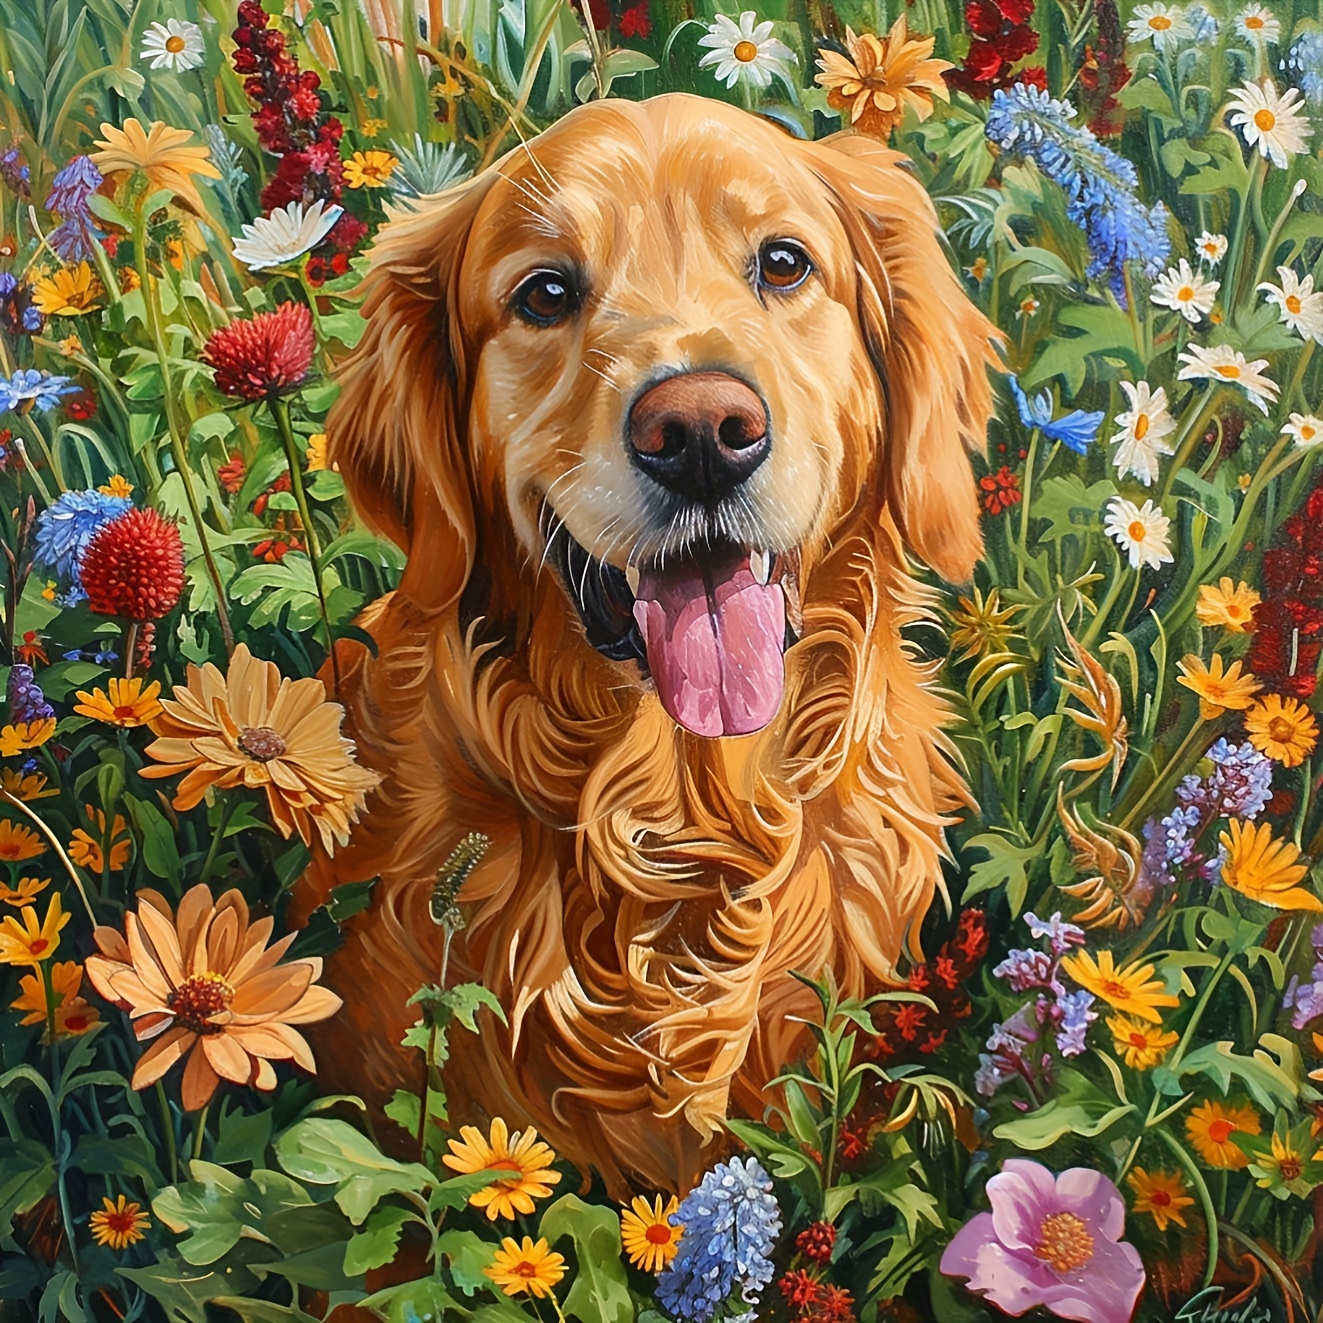 

1pc Large Size 40x40cm/15.7x15.7in Without Frame Diy 5d Artificial Diamond Art Painting Flowers And The Dog, Full Rhinestone Painting, Diamond Art Embroidery Kits, Handmade Home Room Office Wall Decor